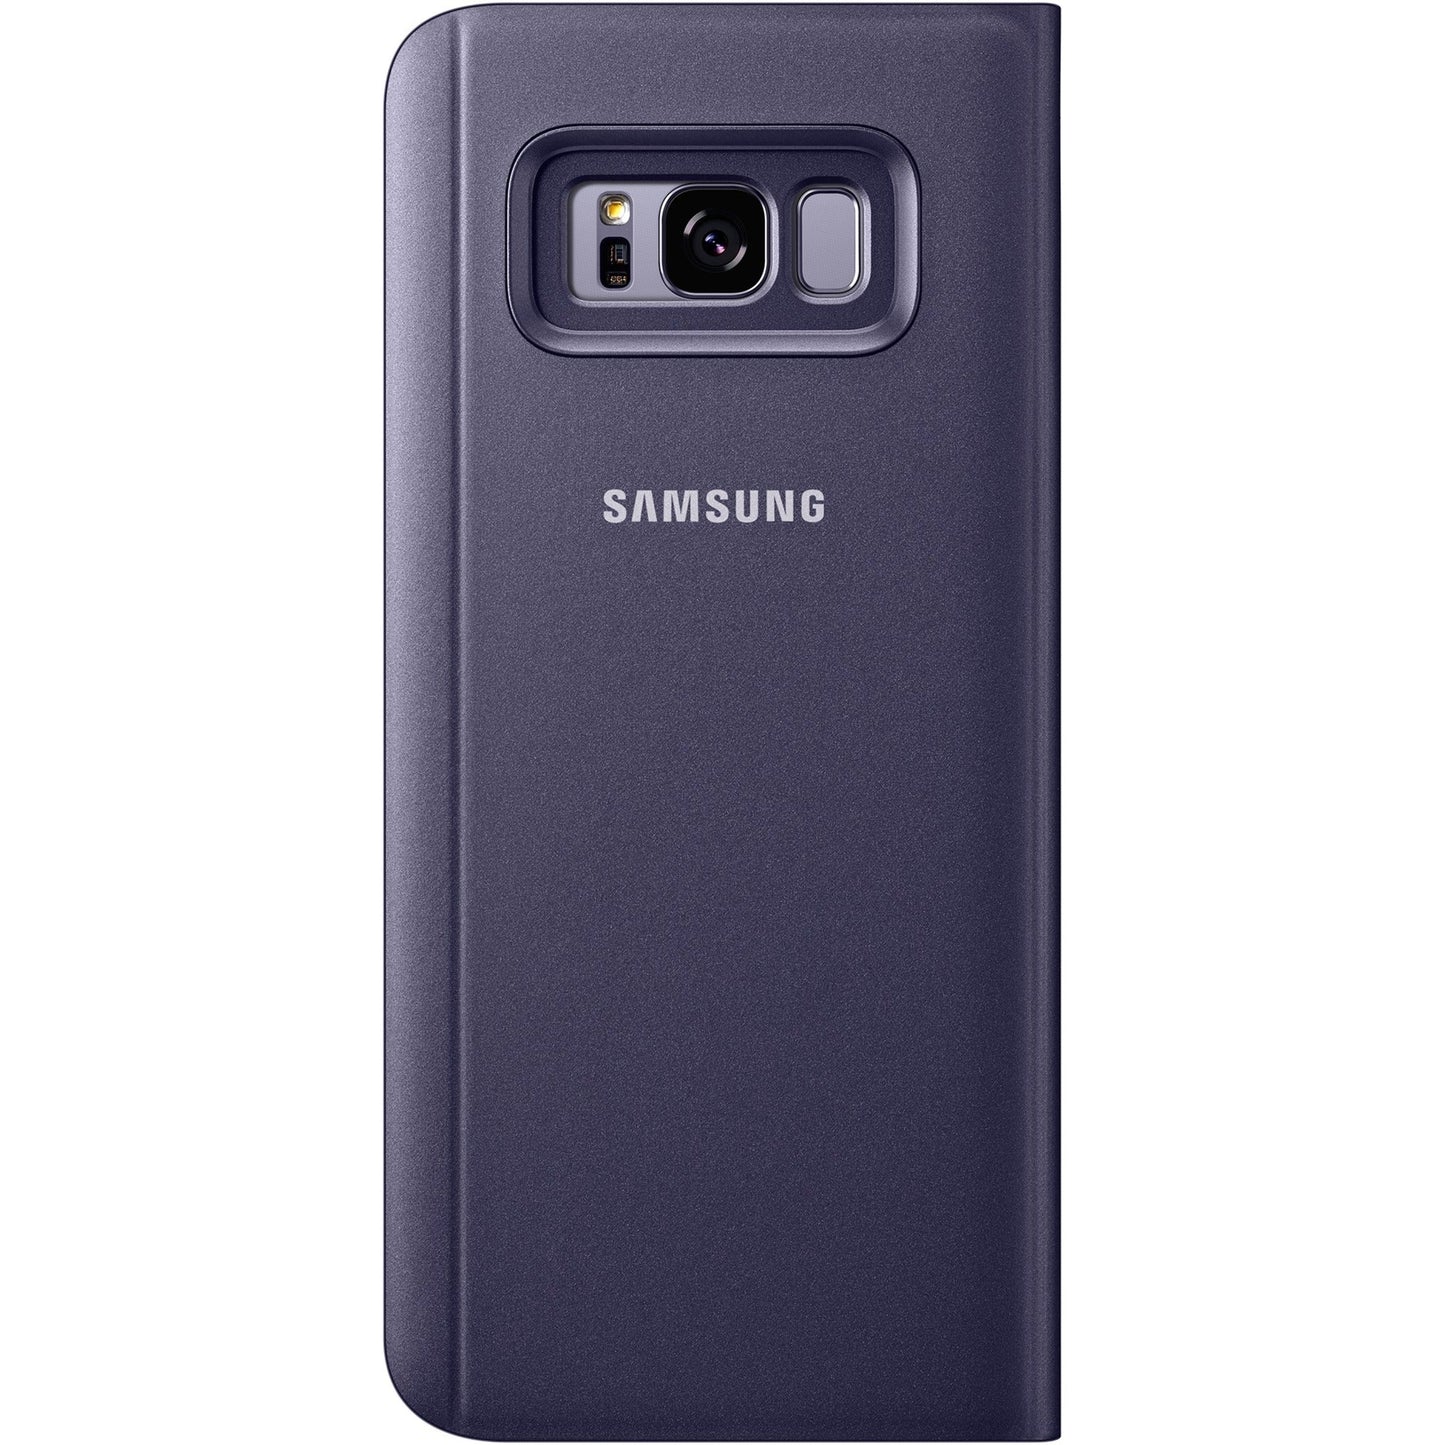 Samsung S-View Carrying Case (Flip) Smartphone - Orchid Gray